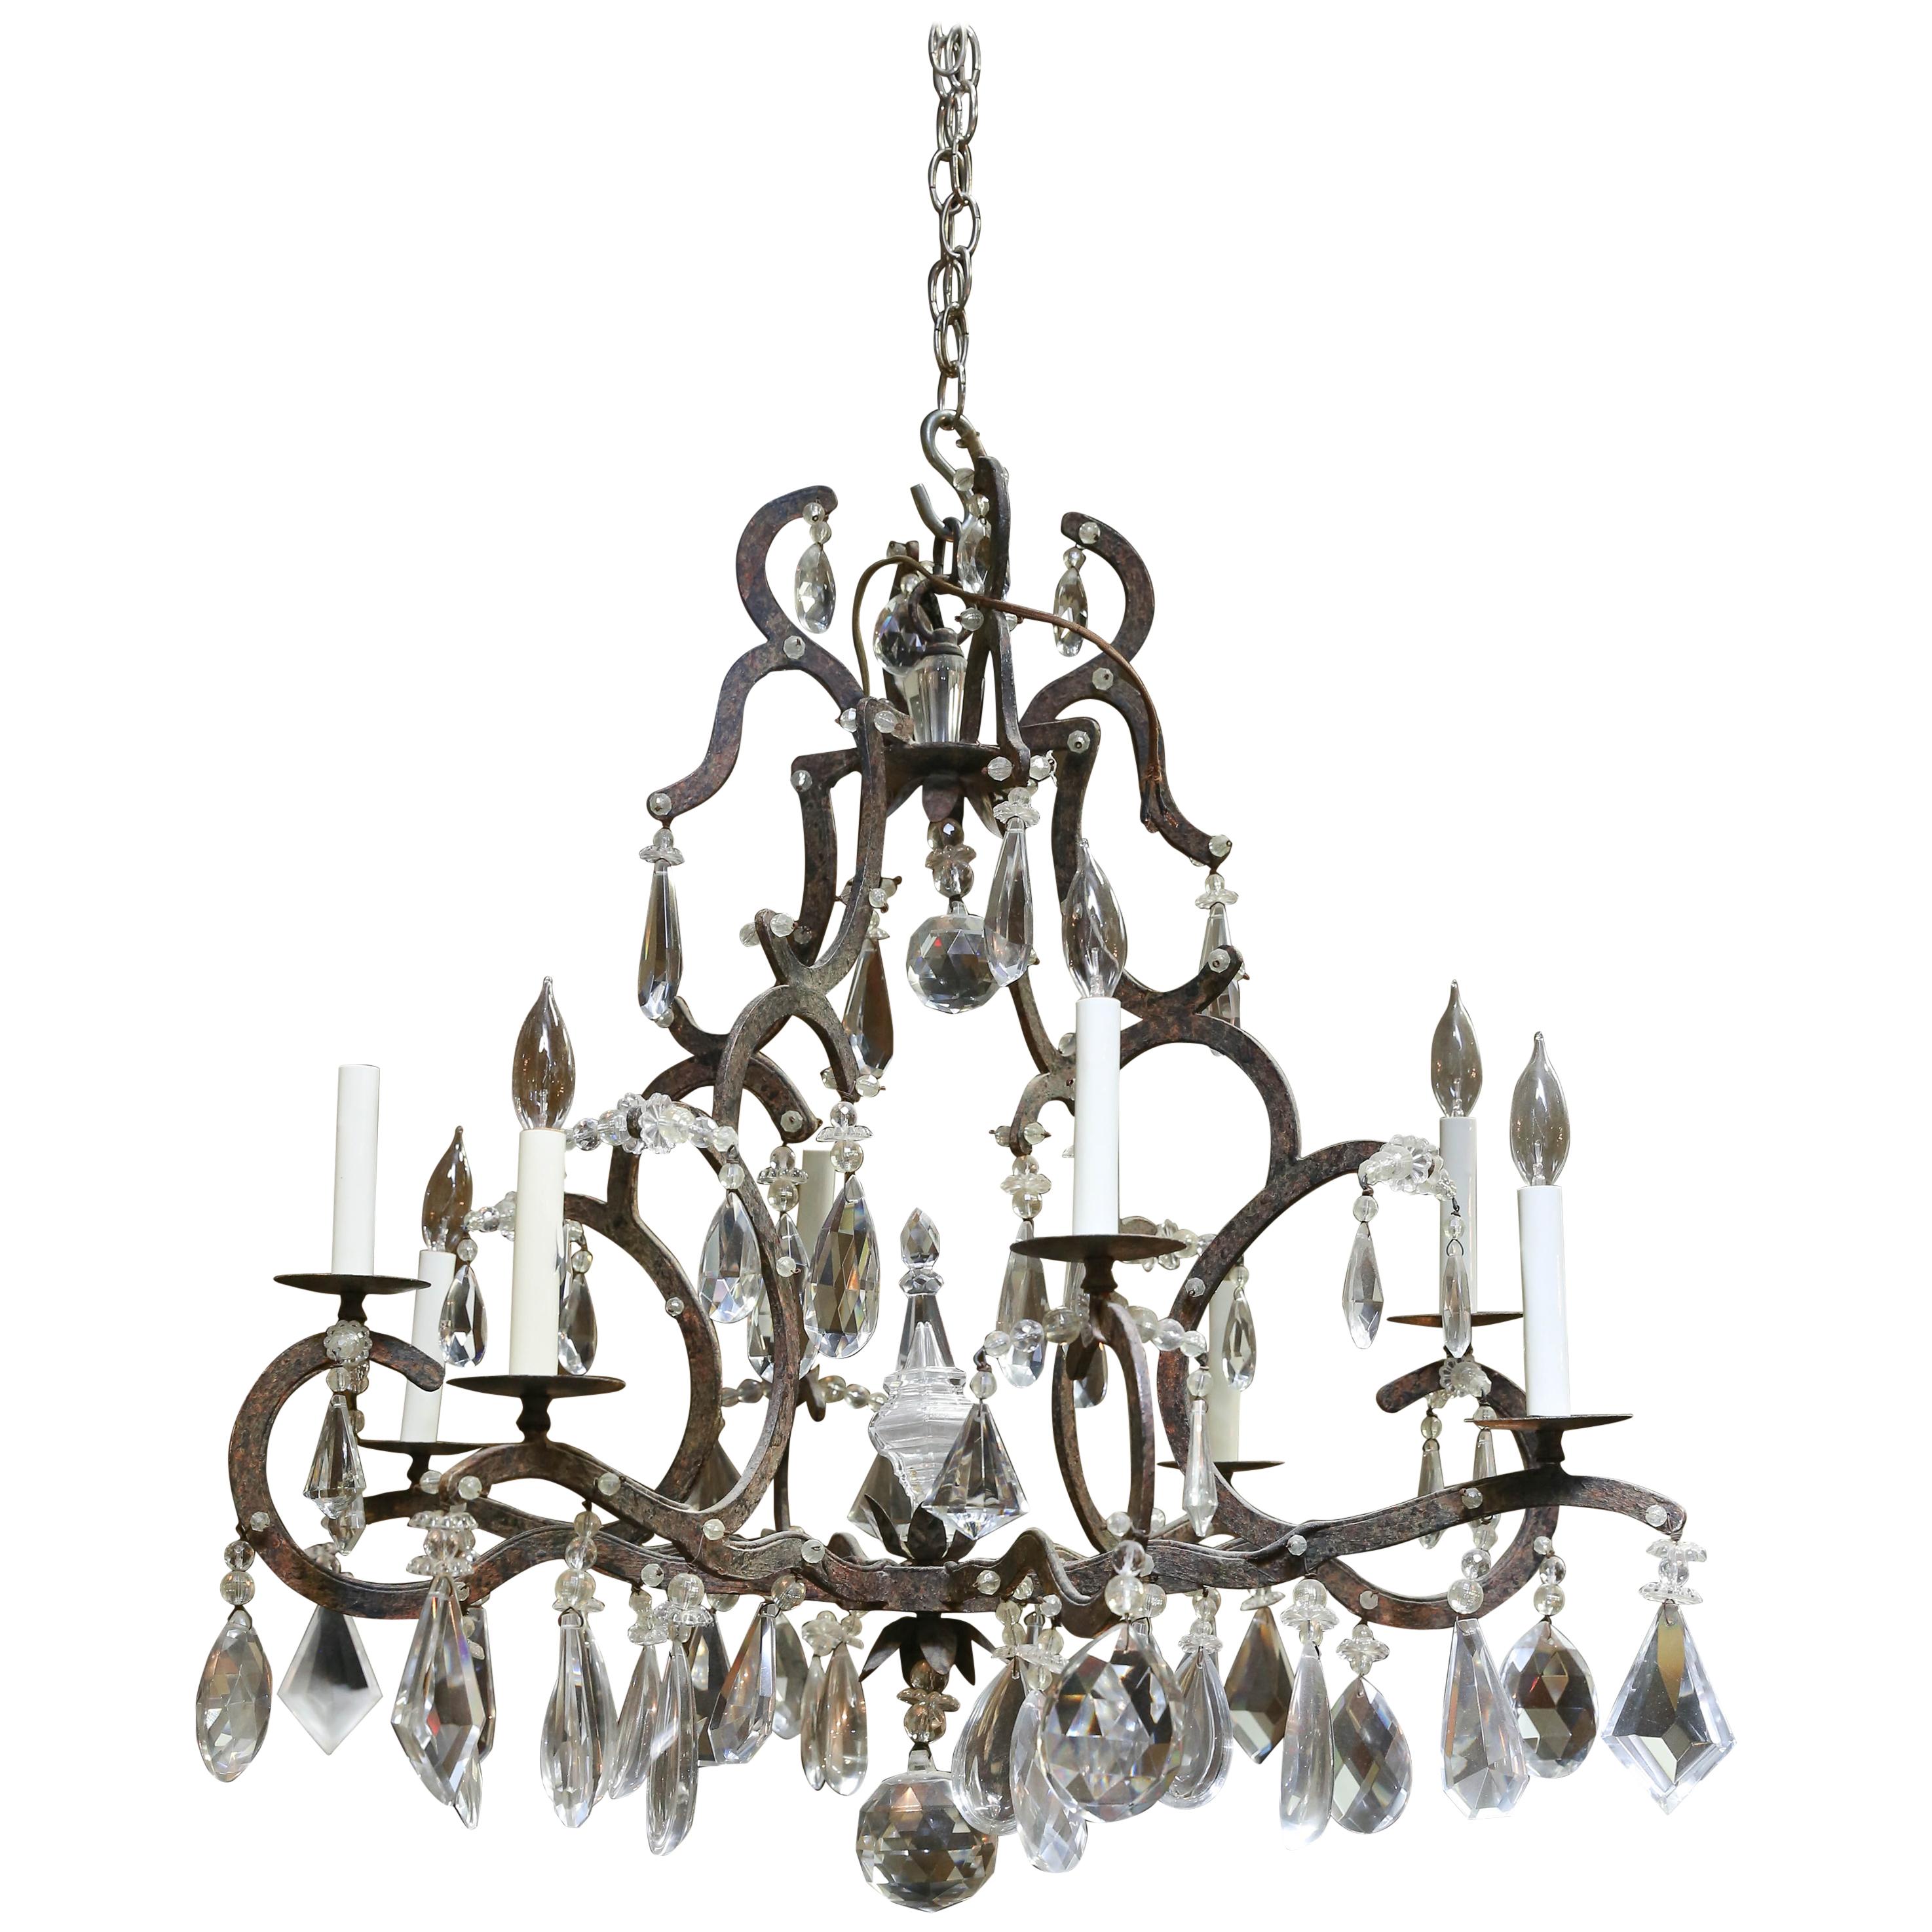 Dennis & Leen 6-Light "Chateau" Chandelier in Chateau Finish For Sale